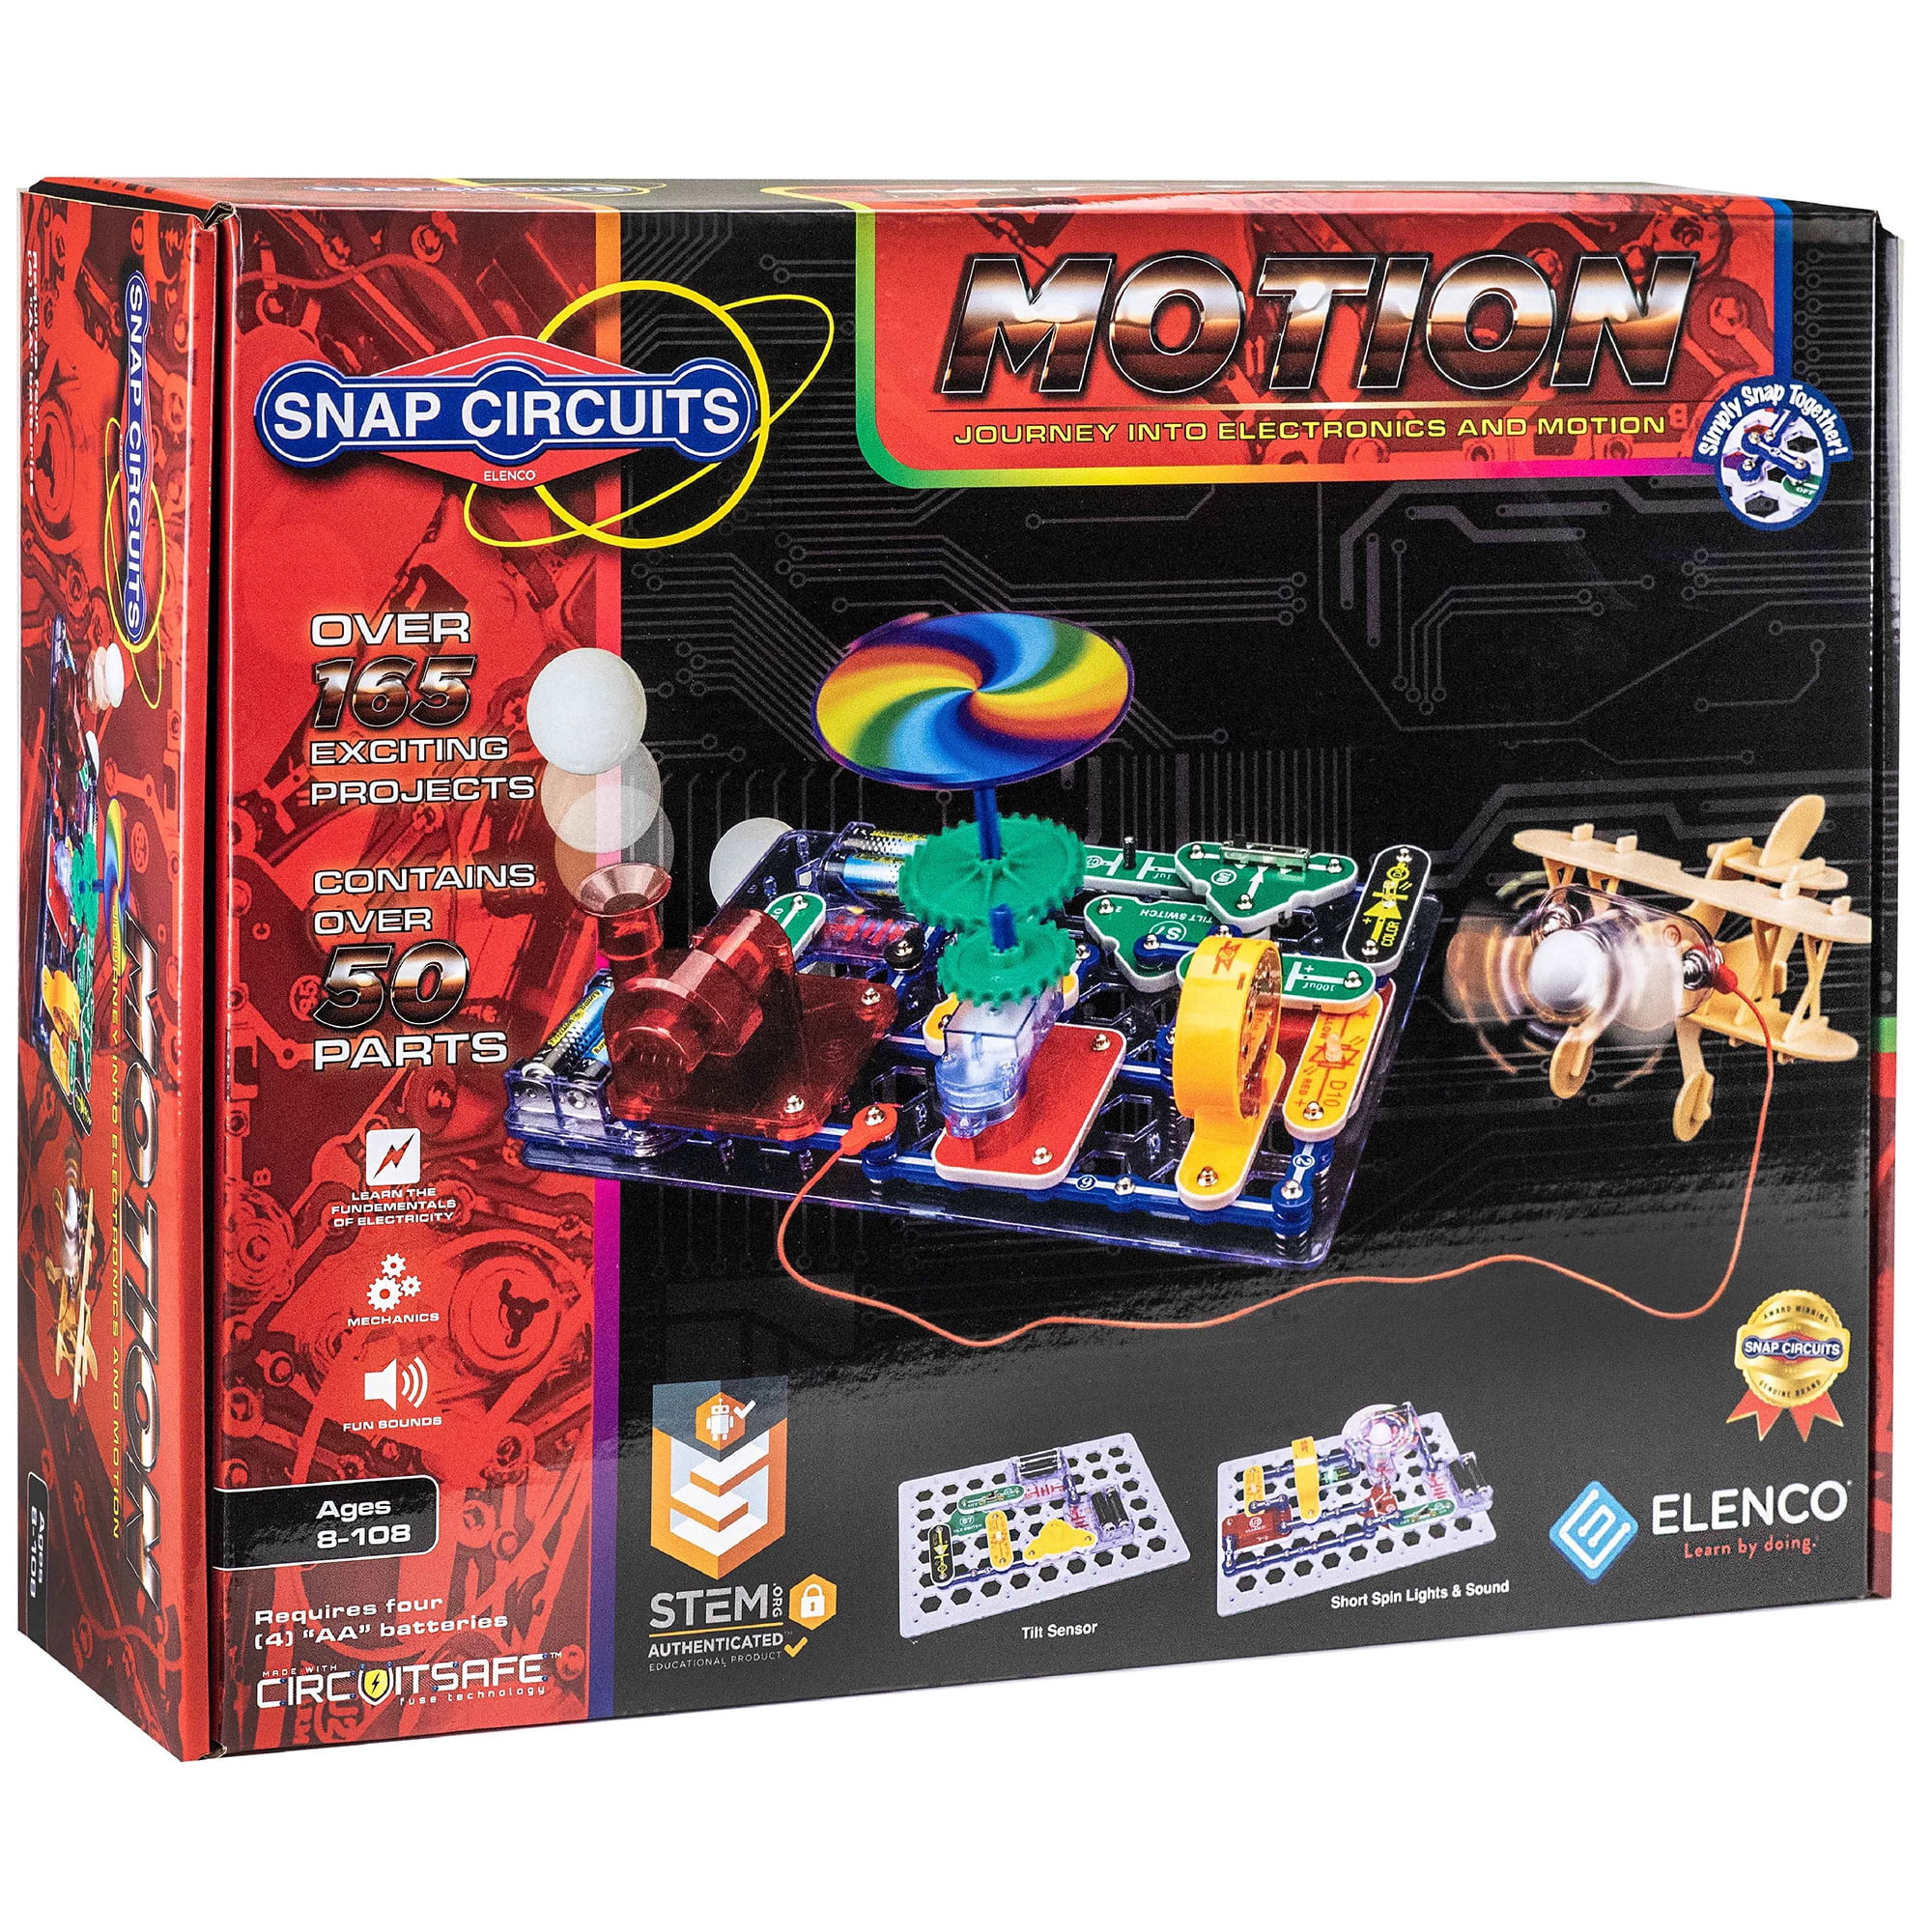 Snap Circuits Summer of Stem: Activity Pack Offers Three Months of Learning, Creativity and Play with Award Winning